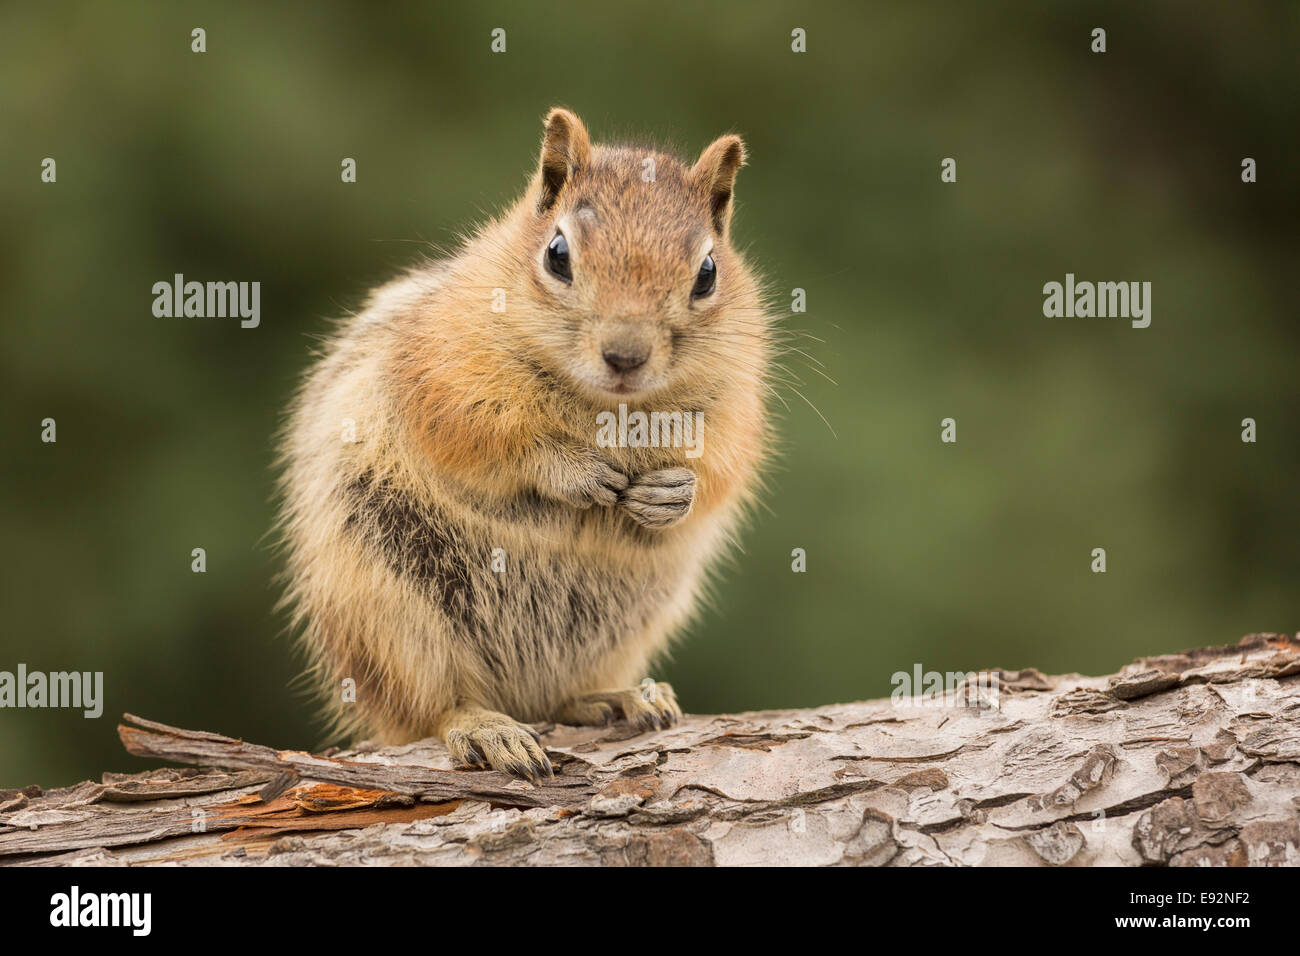 Eastern Chipmunk in the wild, USA Stock Photo